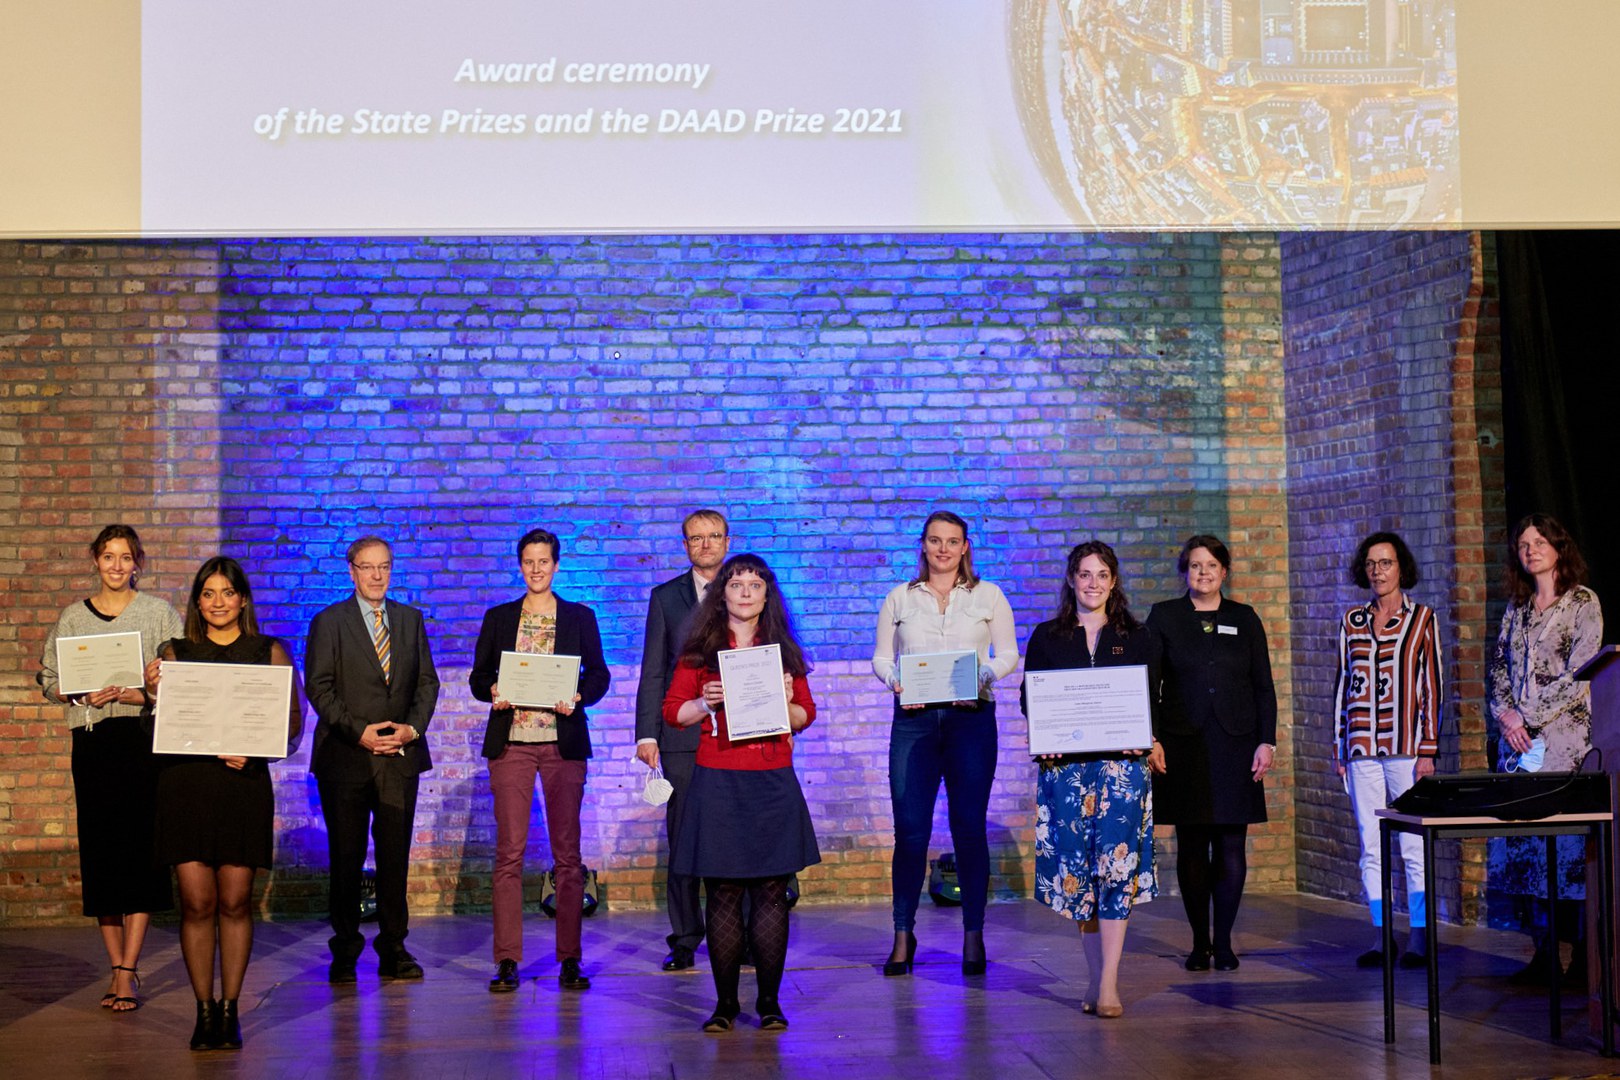 The state awards were presented as part of the ceremonial events surrounding the start of the academic year at the University of Bonn.